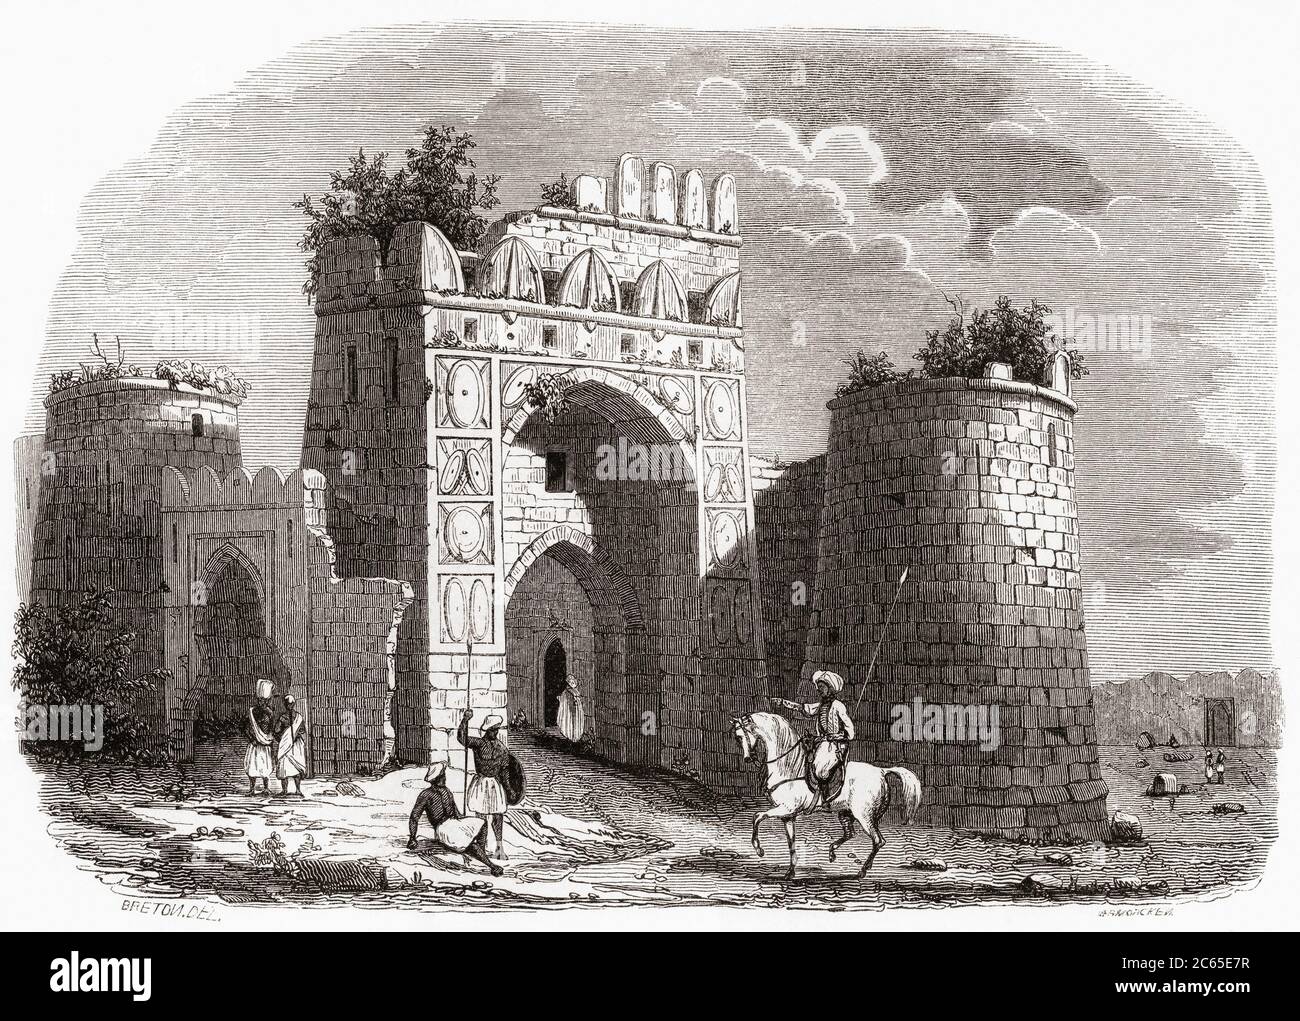 Doorway of the Feroz Shah Kotla, or Kotla, near Delhi, India, seen here in the 19th century.  A fortress built by Sultan Feroz Shah Tughlaq.  From Monuments de Tous les Peuples, published 1843. Stock Photo